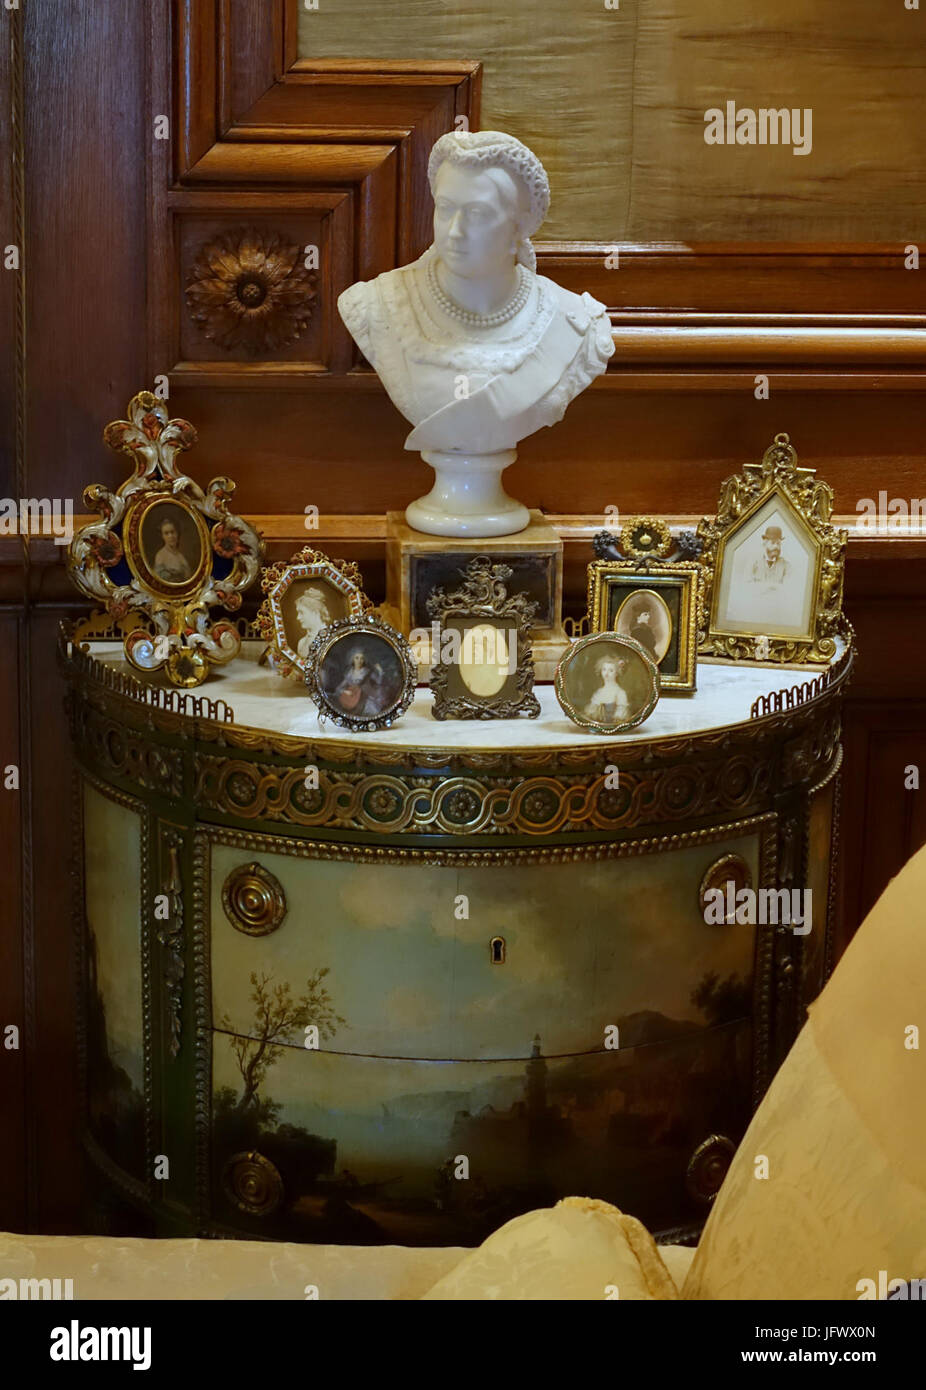 Chest of drawers, attributed to René Dubois, France, 1770-1775, with bust of Queen Victoria by Joseph Edgar Boehm, c. 1870 - Waddesdon Manor - Buckinghamshire, England - DSC07665 Stock Photo